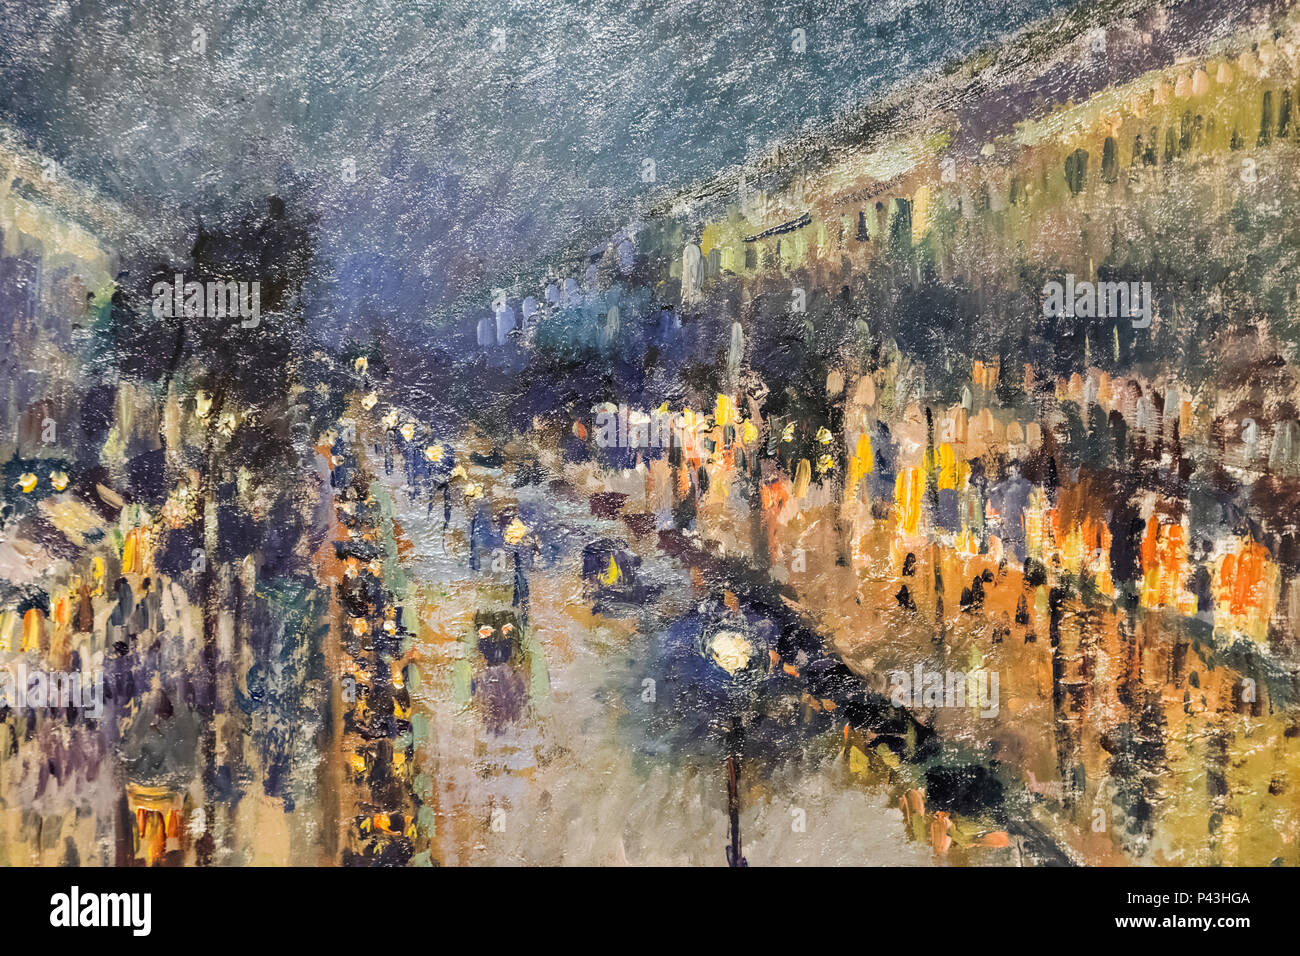 Painting titled 'The Boulevard Montmartre at Night' by Camille Pissarro dated 1877 Stock Photo